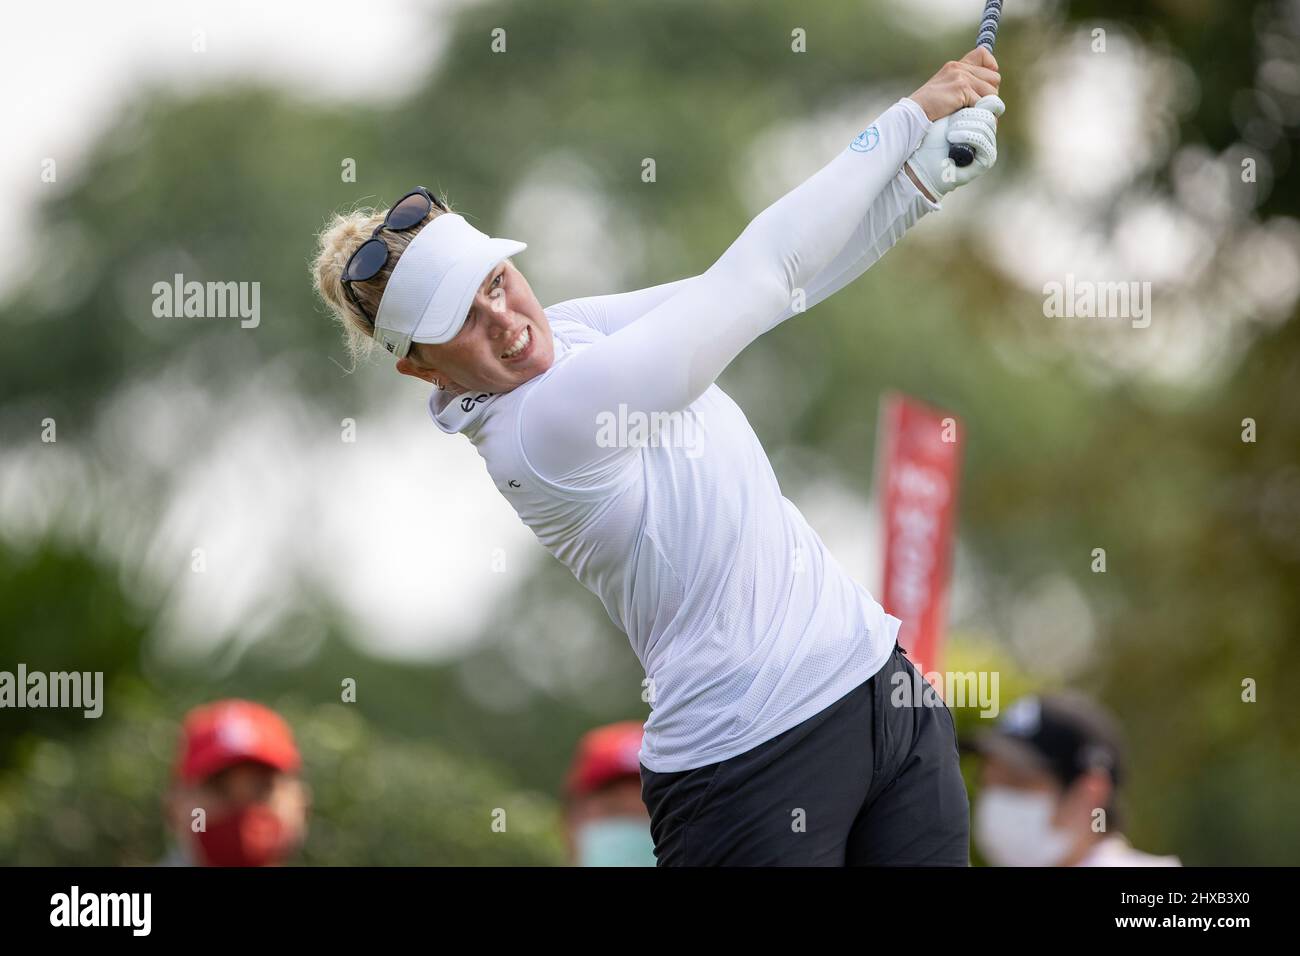 Pattaya, Thailand. 11th Mar, 2022. Pattaya Thailand - March 11:  Nanna Koerstz Madsen from Denmark during day 2 of The Honda LPGA Thailand at Siam Country Club Old Course on March 11, 2022 in Pattaya, Thailand (Photo by Peter van der Klooster/Orange Pictures) Credit: Orange Pics BV/Alamy Live News Stock Photo